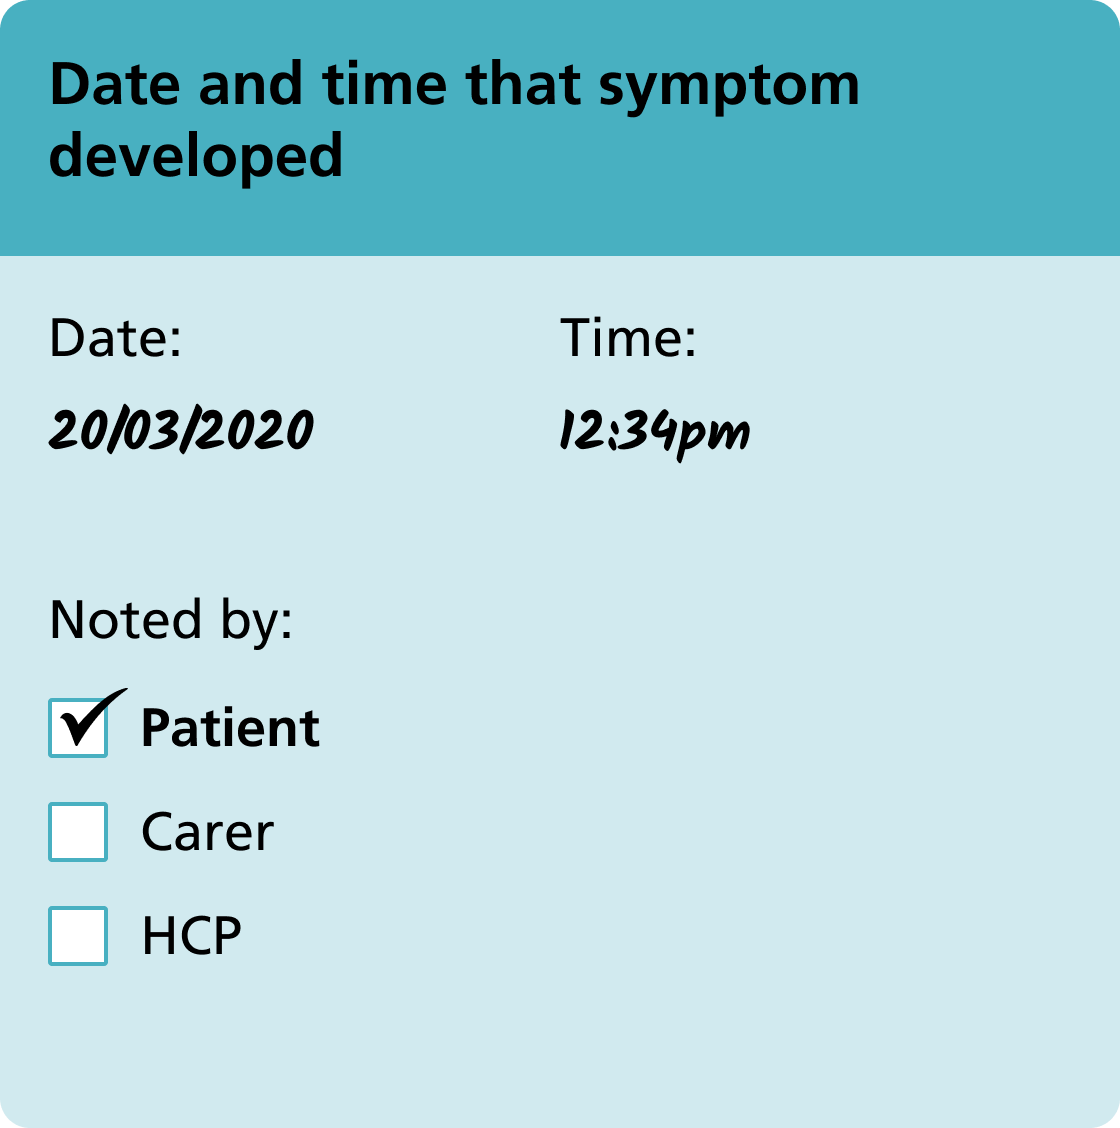 Date and time that symptom developed